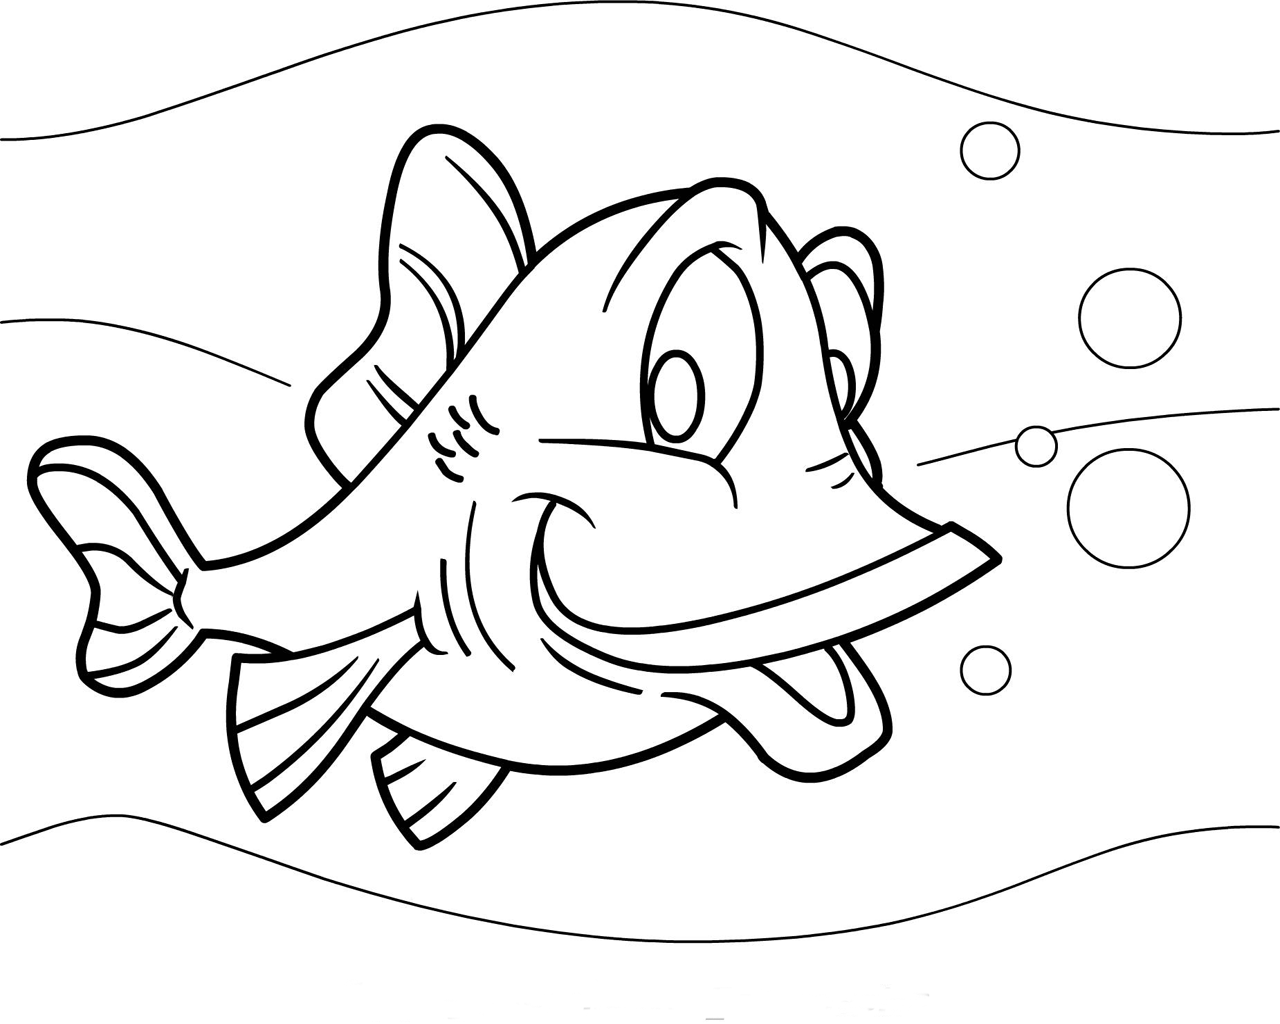 coloring pages pictures rainbow fish picture, coloring pages pictures